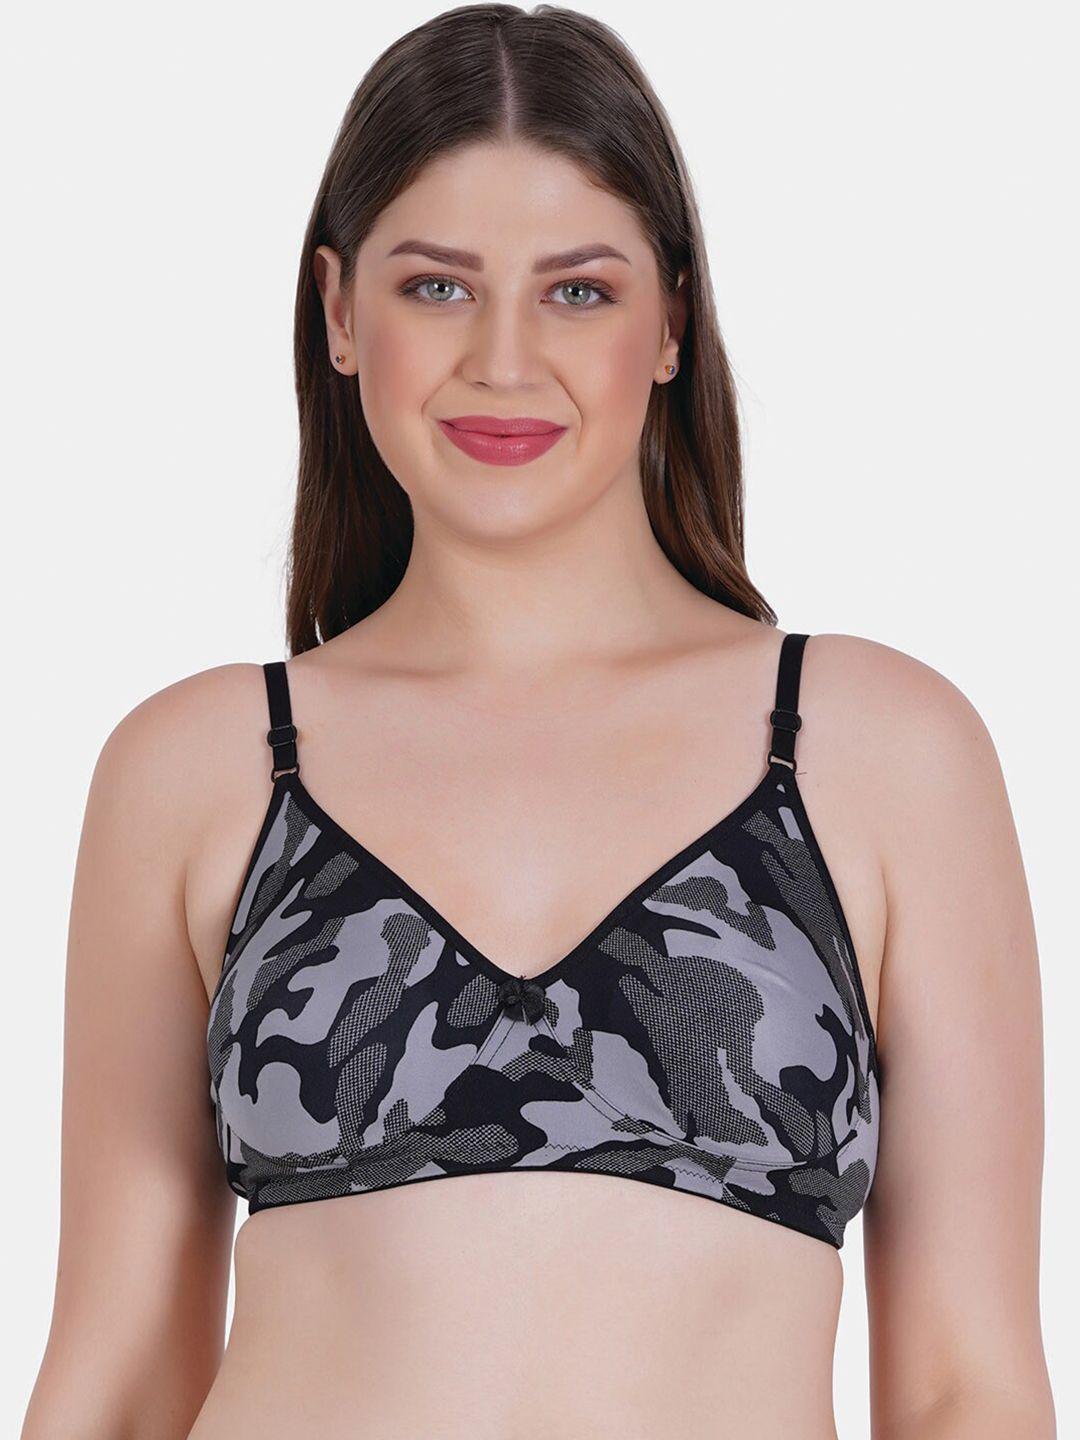 reveira camouflage printed everyday bra with dry fit full coverage all day comfort